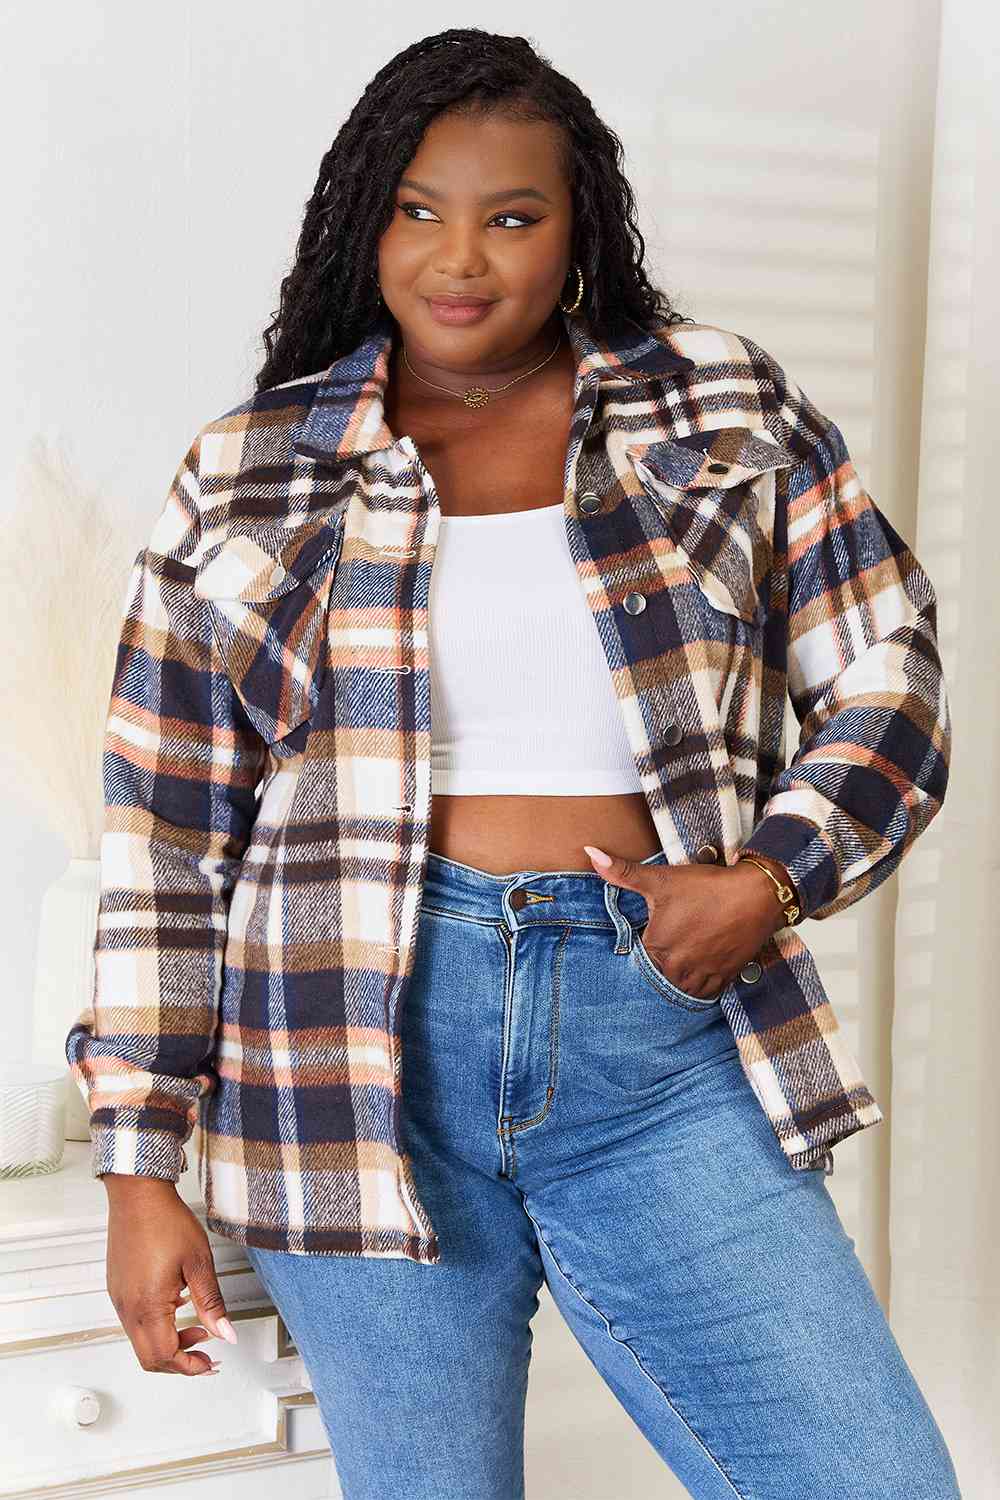 Dark Slate Gray Double Take Plaid Button Front Shirt Jacket with Breast Pockets Sentient Beauty Fashions Apparel & Accessories